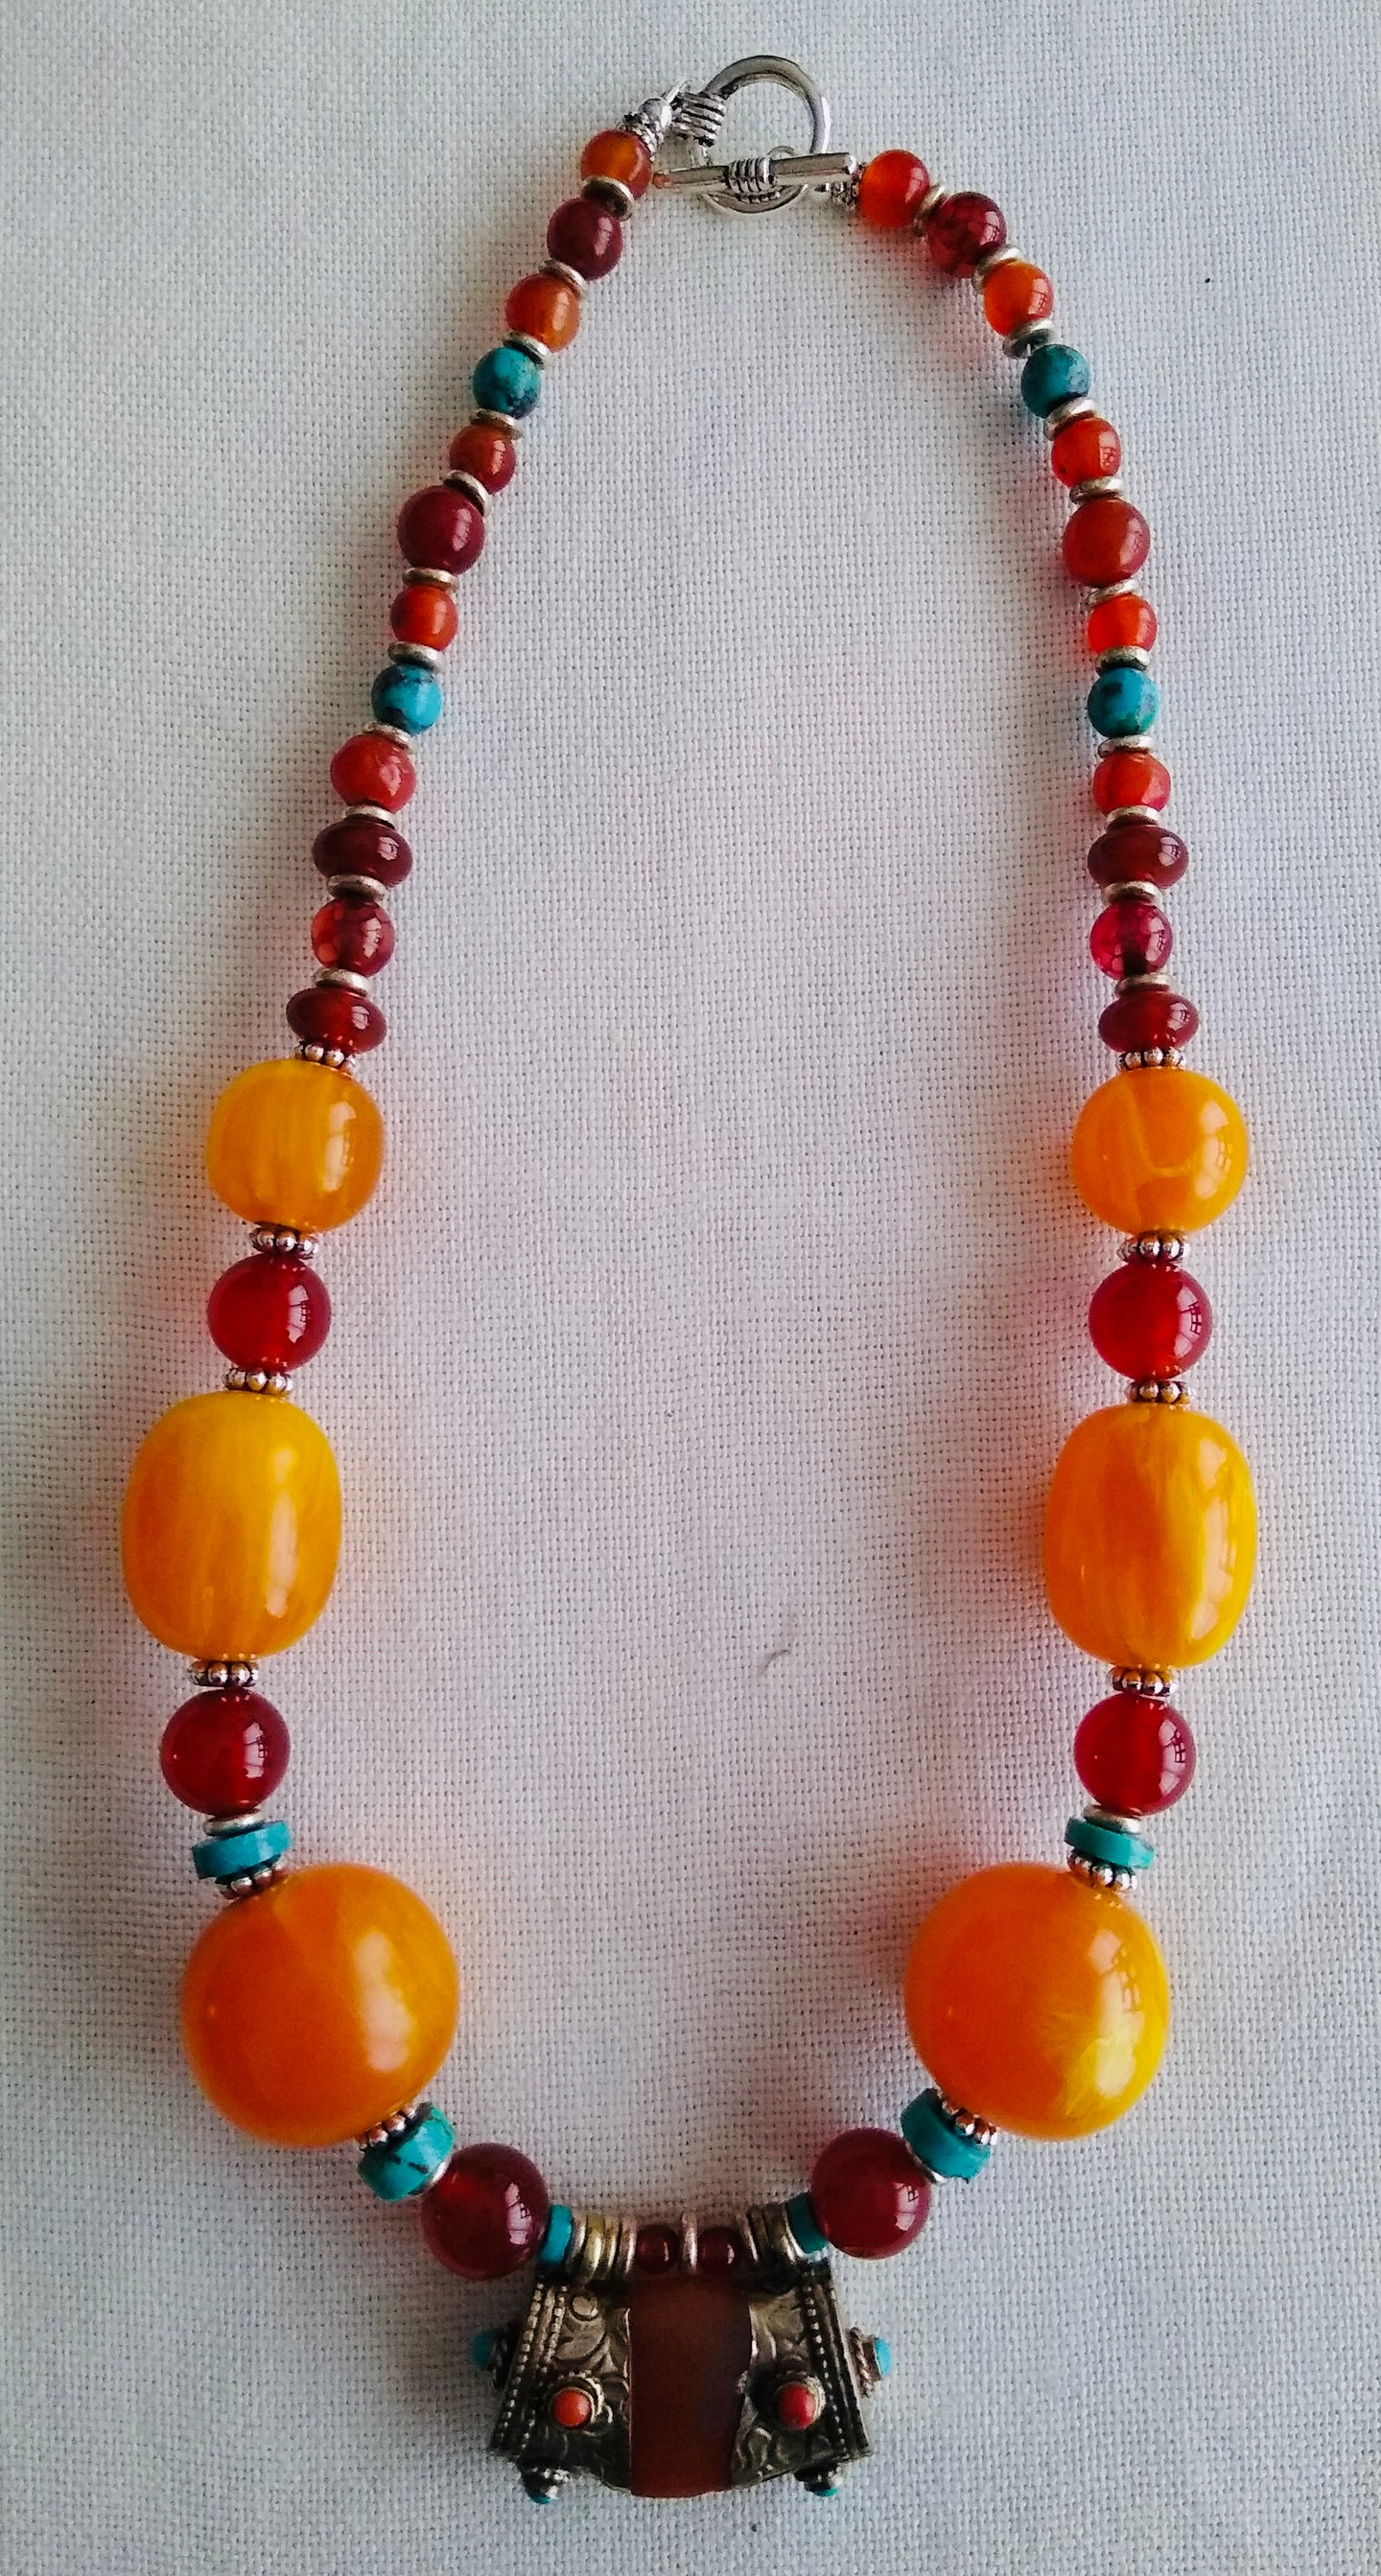 Tania Snihur single strand necklace of Tibetan silver capped amber ,coral & turquoise beads  # 10